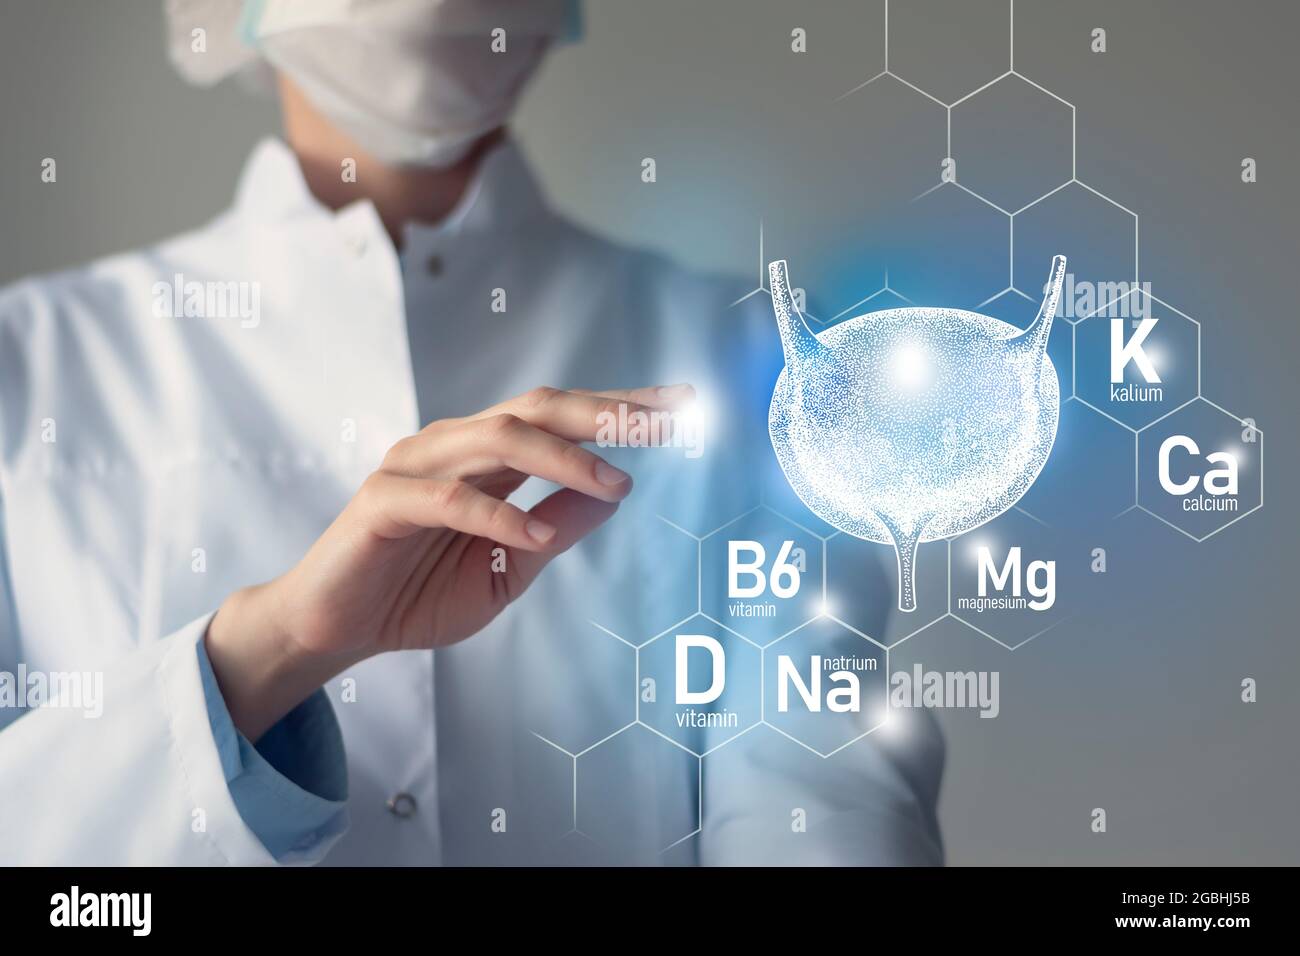 Essential nutrients for Bladder health including Natrium, Magnesium, Vitamin B6, Calcium. Blurred portrait of doctor holding highlighted blue Bladder. Stock Photo